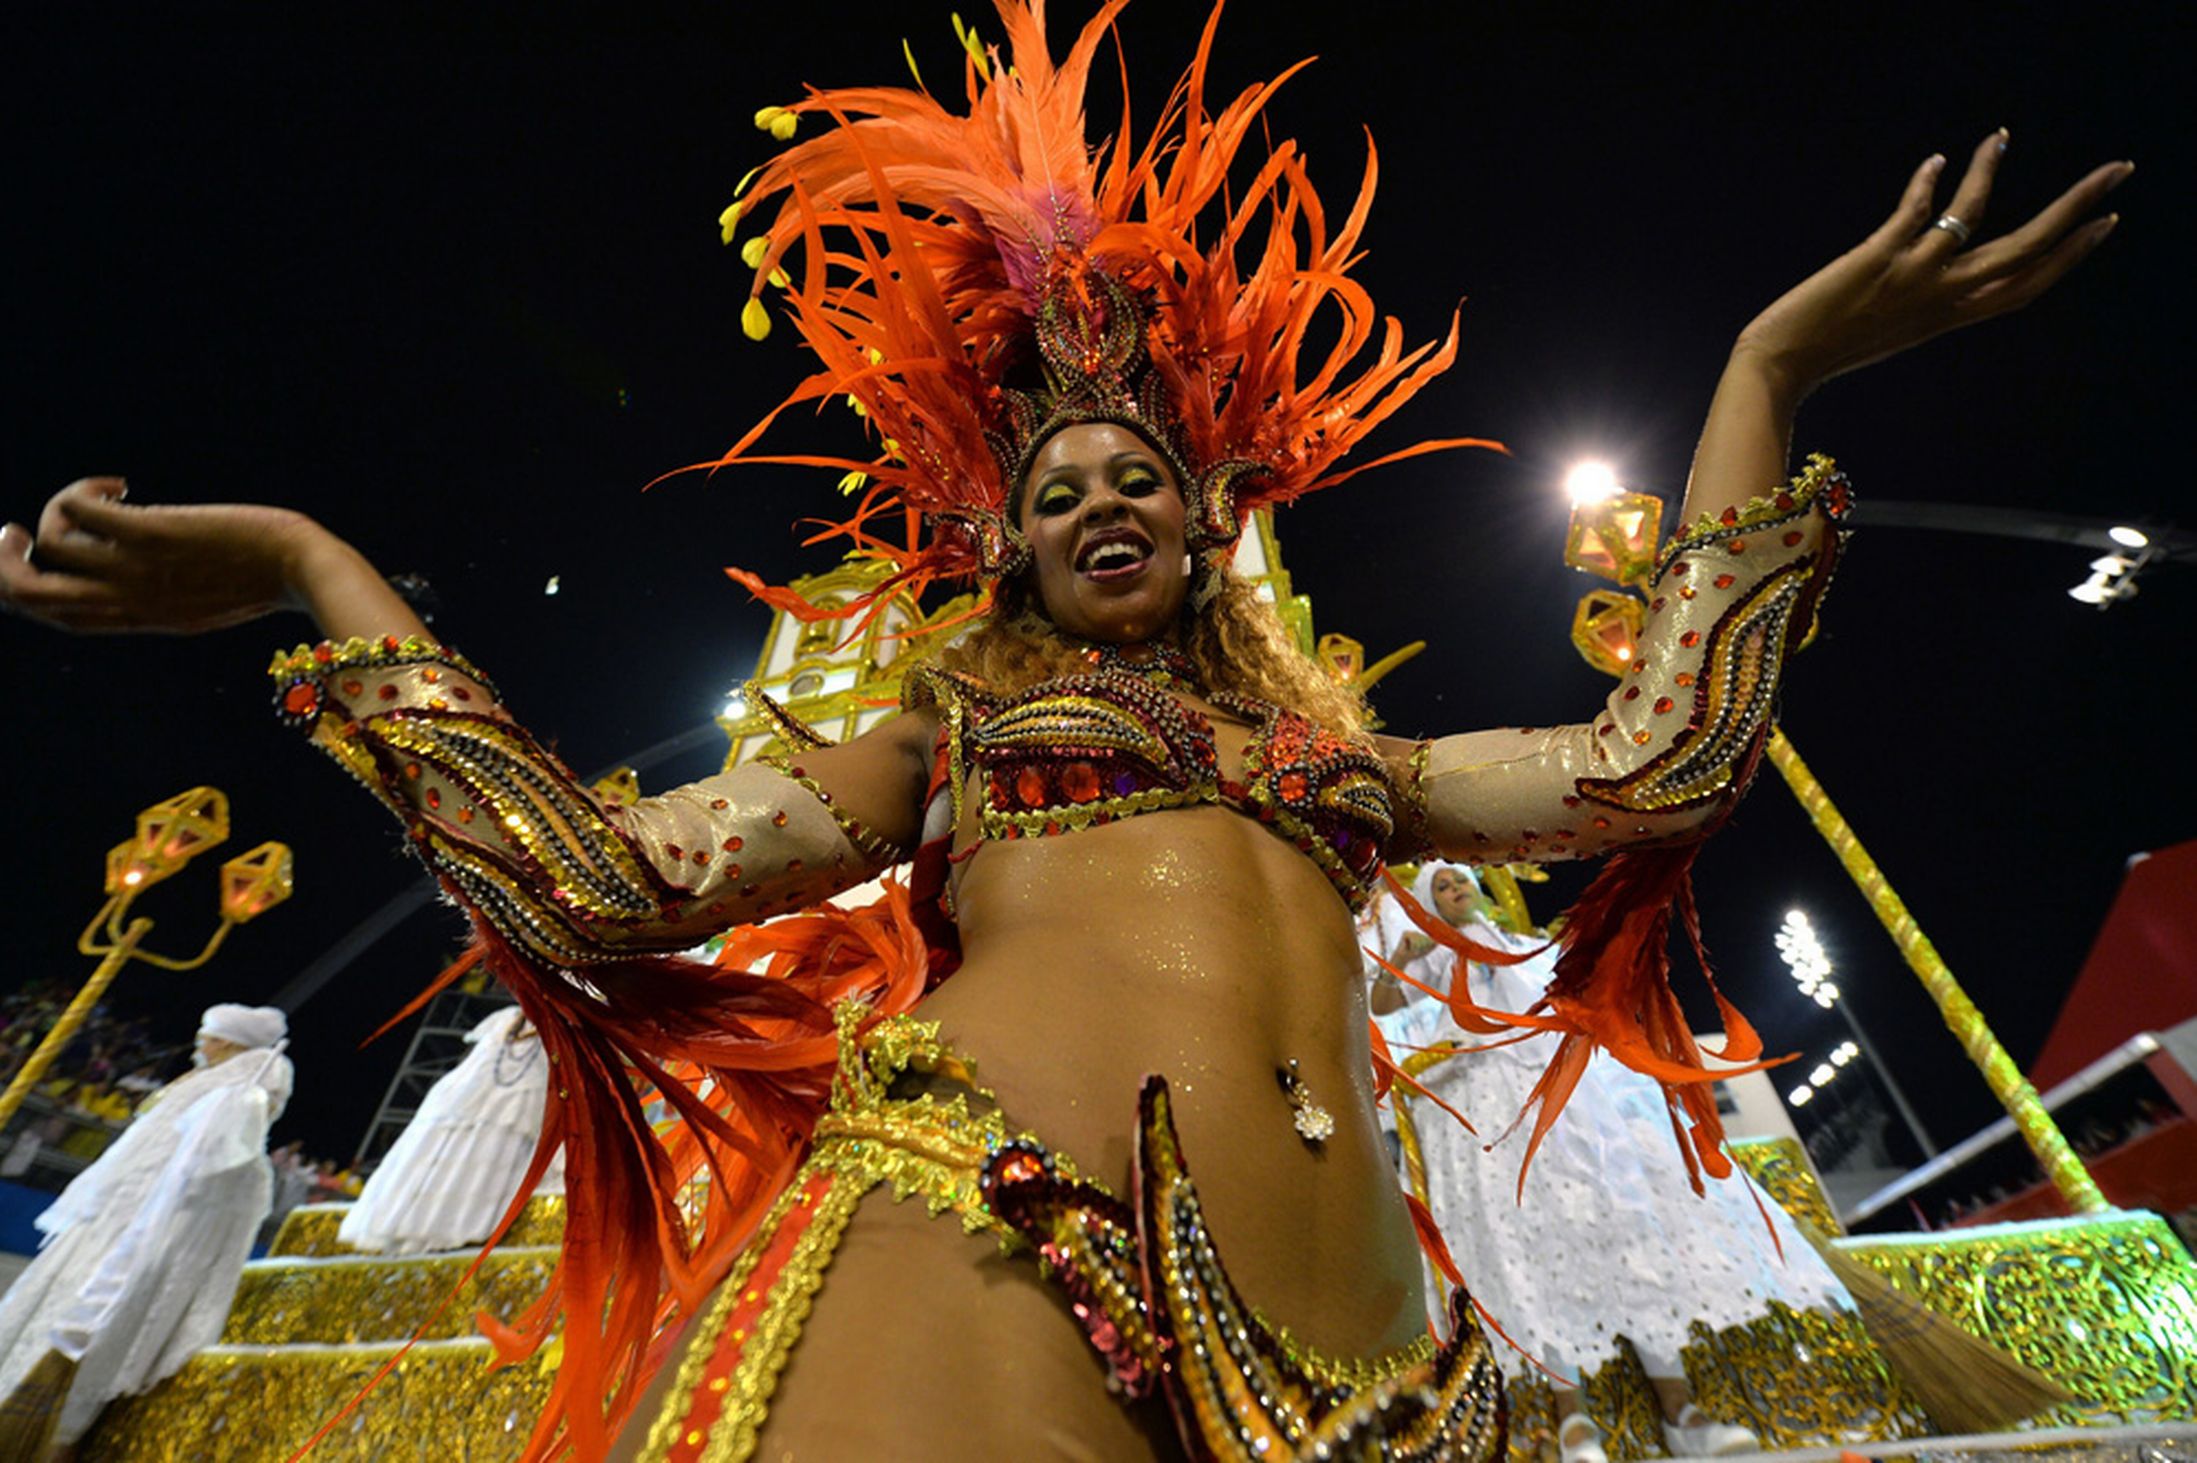 More than half a million foreign tourists visit Brazil for carnival every year (Photo Credit: Daily Mirror)